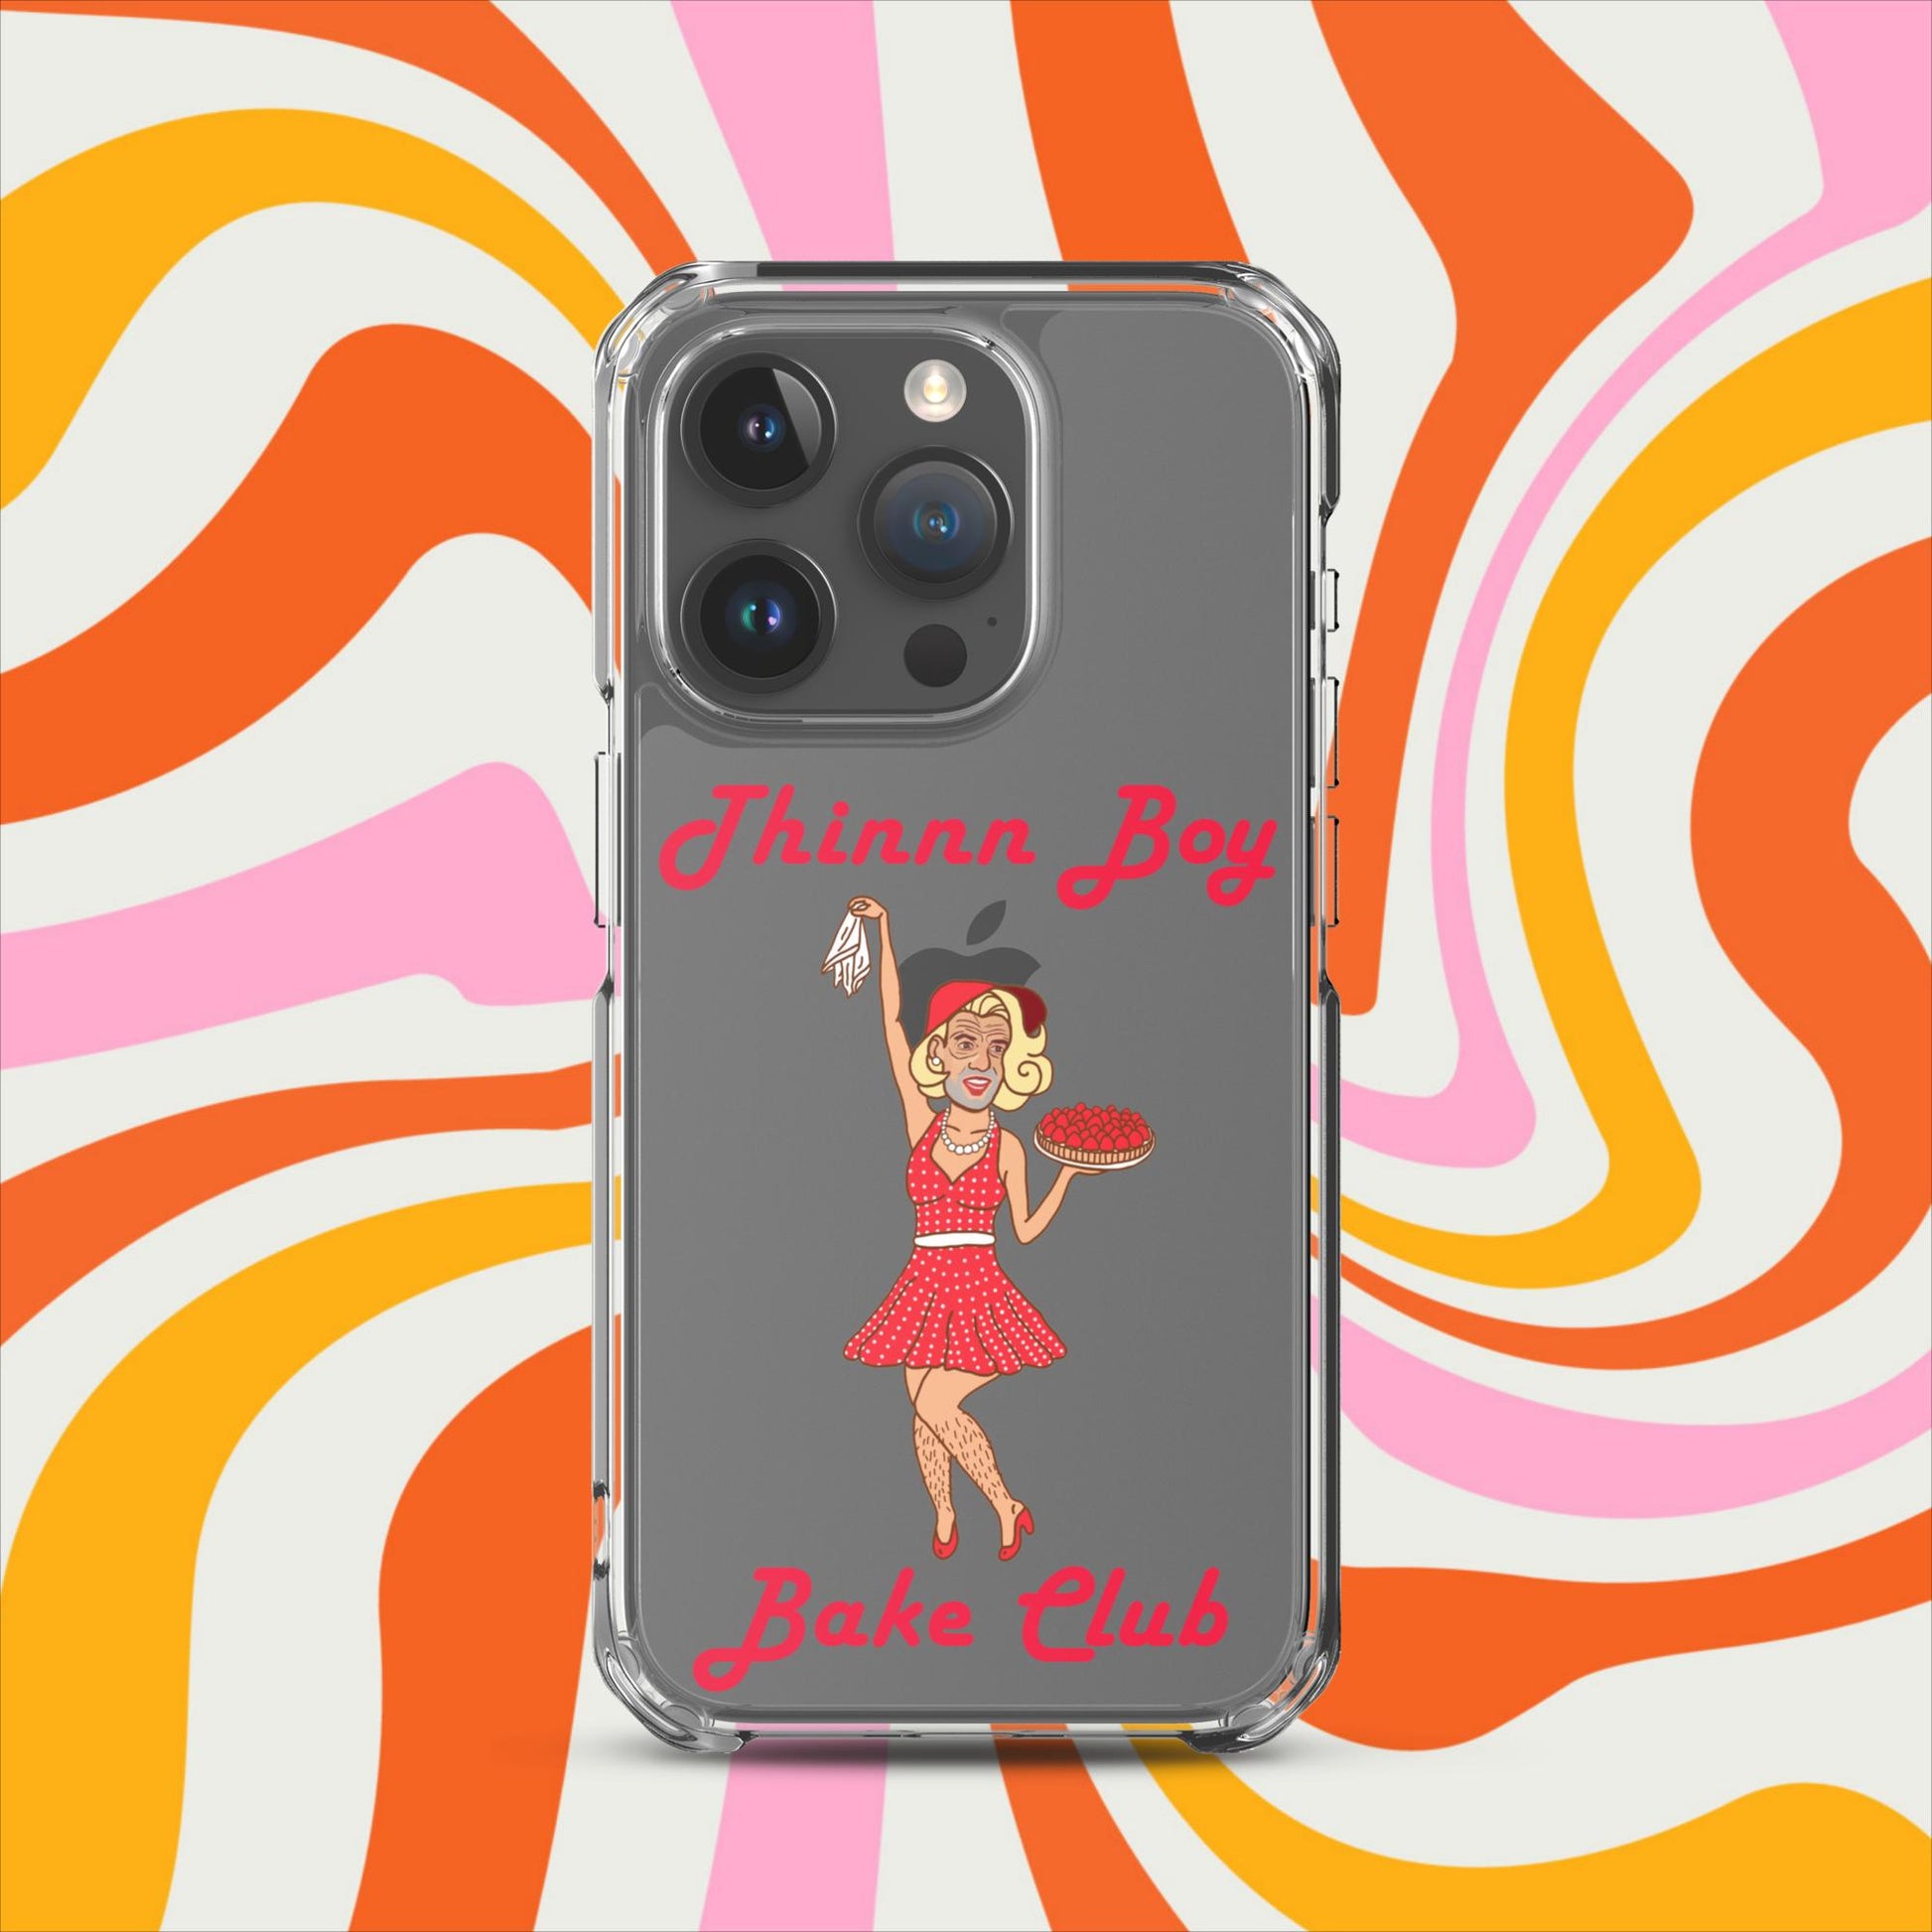 Thinnn Boy Bake Club The Fighter and The Kid TFATK Podcast Comedy 60s retro housewife Bryan Callen Clear Case for iPhone Next Cult Brand